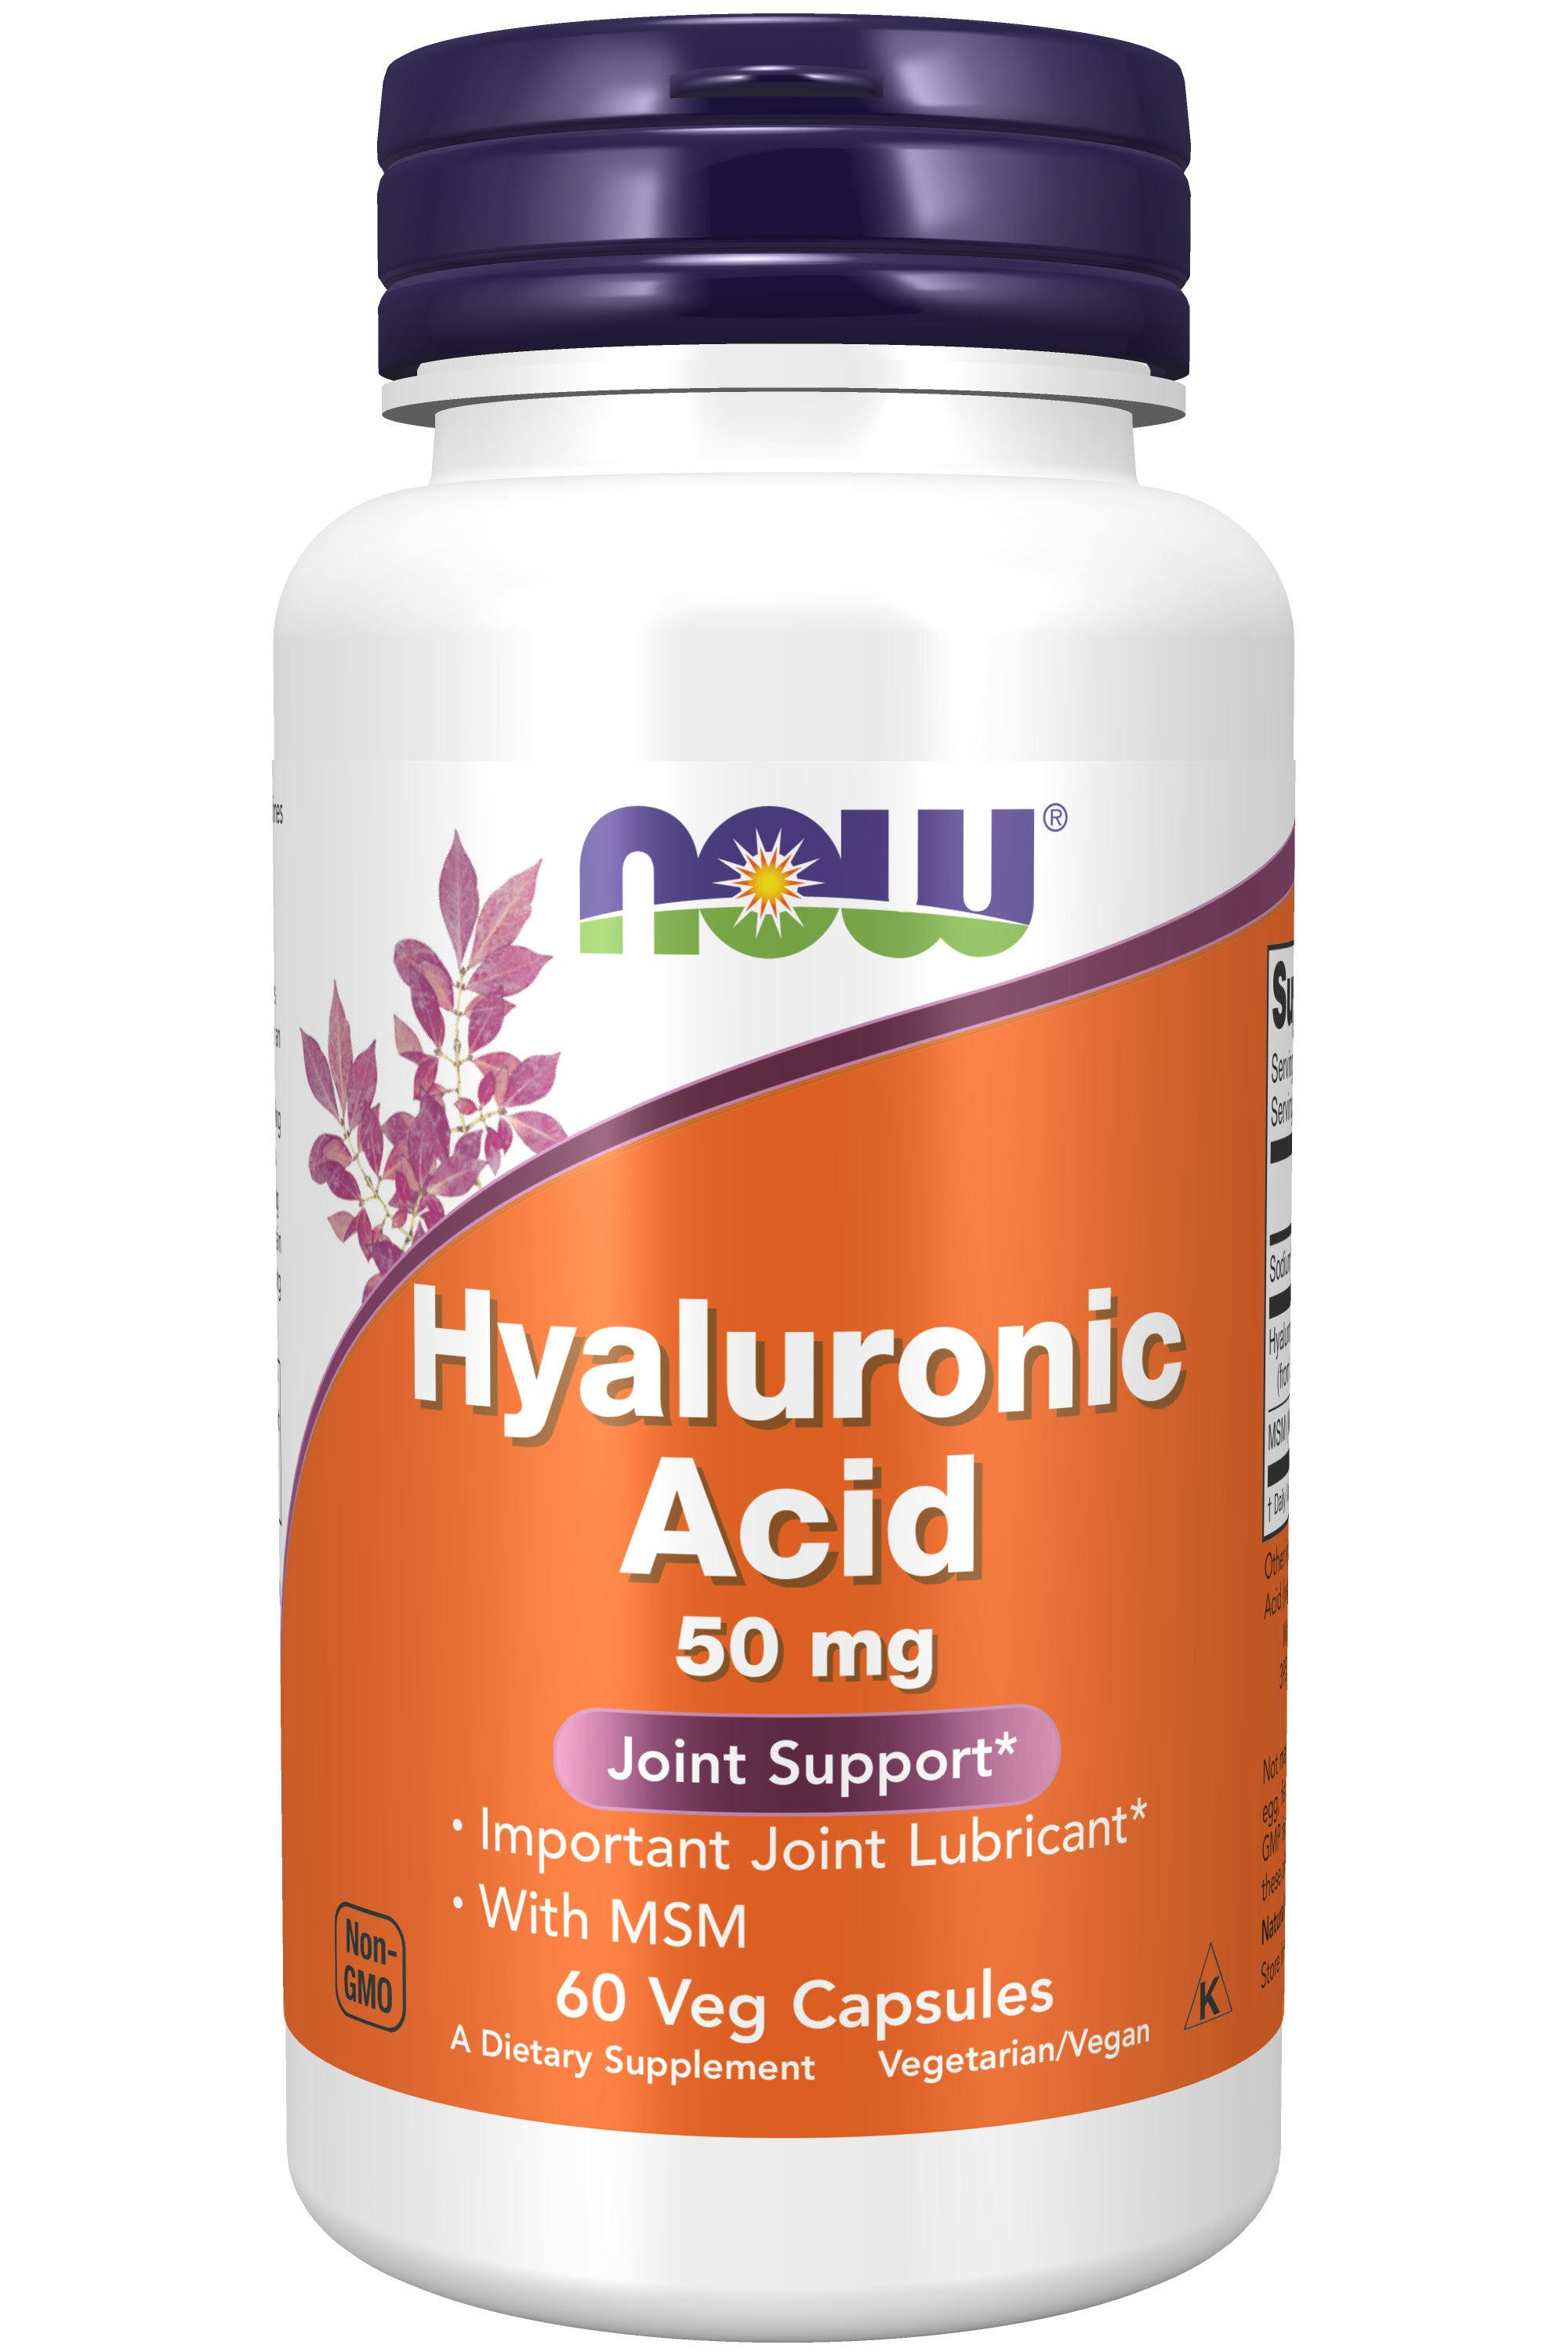 NOW Foods Hyaluronic Acid with MSM 60 Veg Capsules